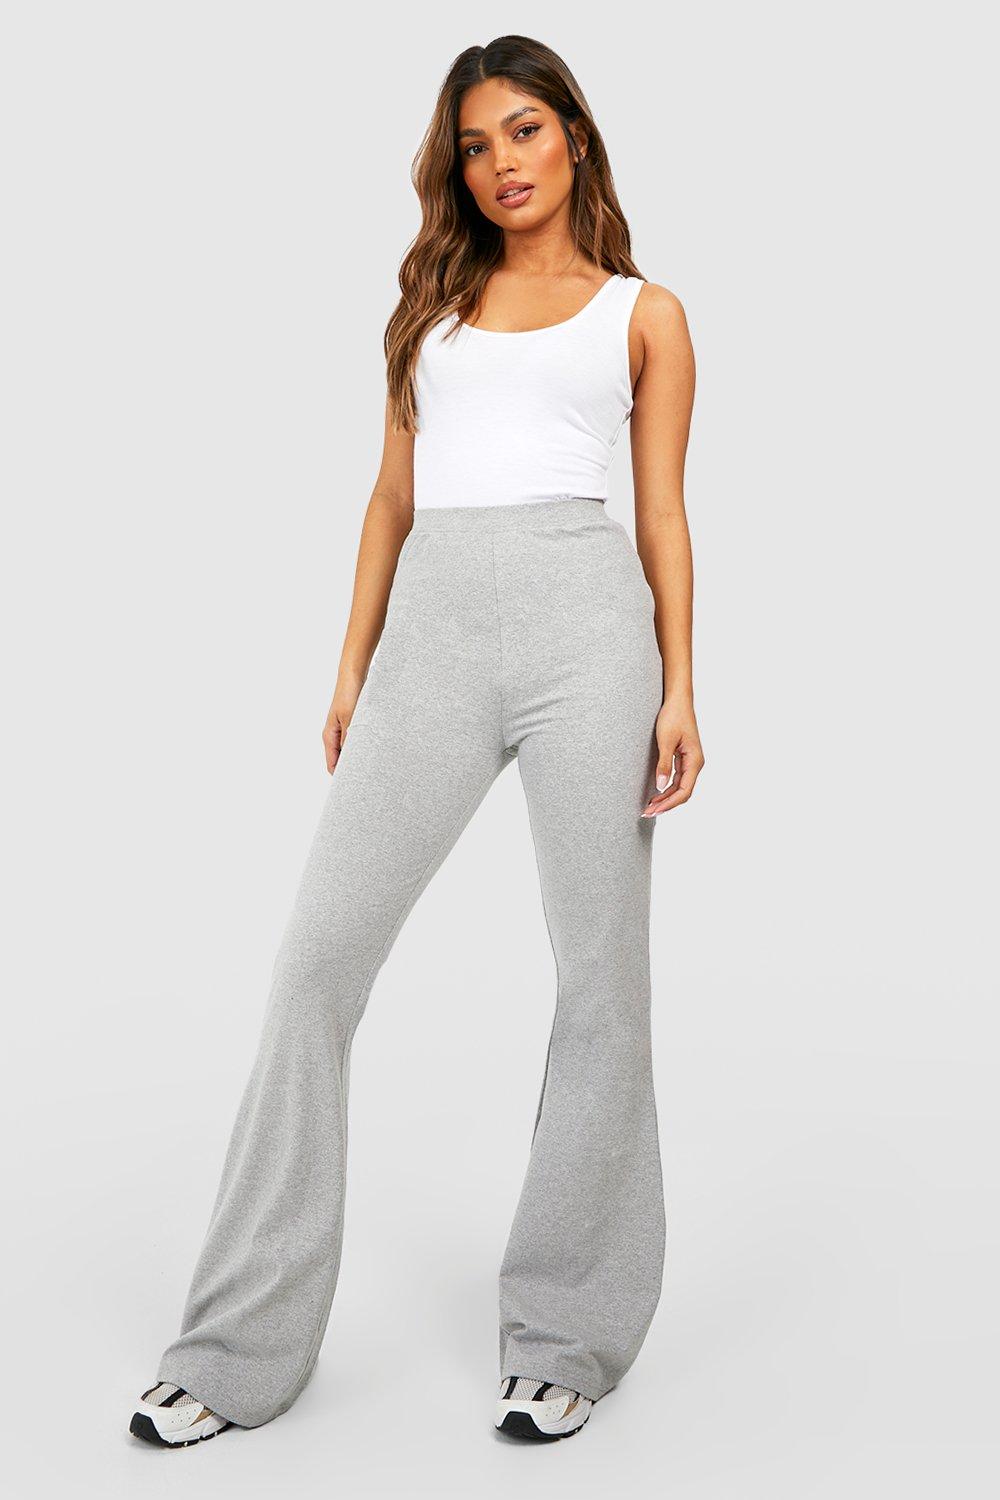 Women's Cotton 2 Pack Black & Grey High Waisted Flared Trousers